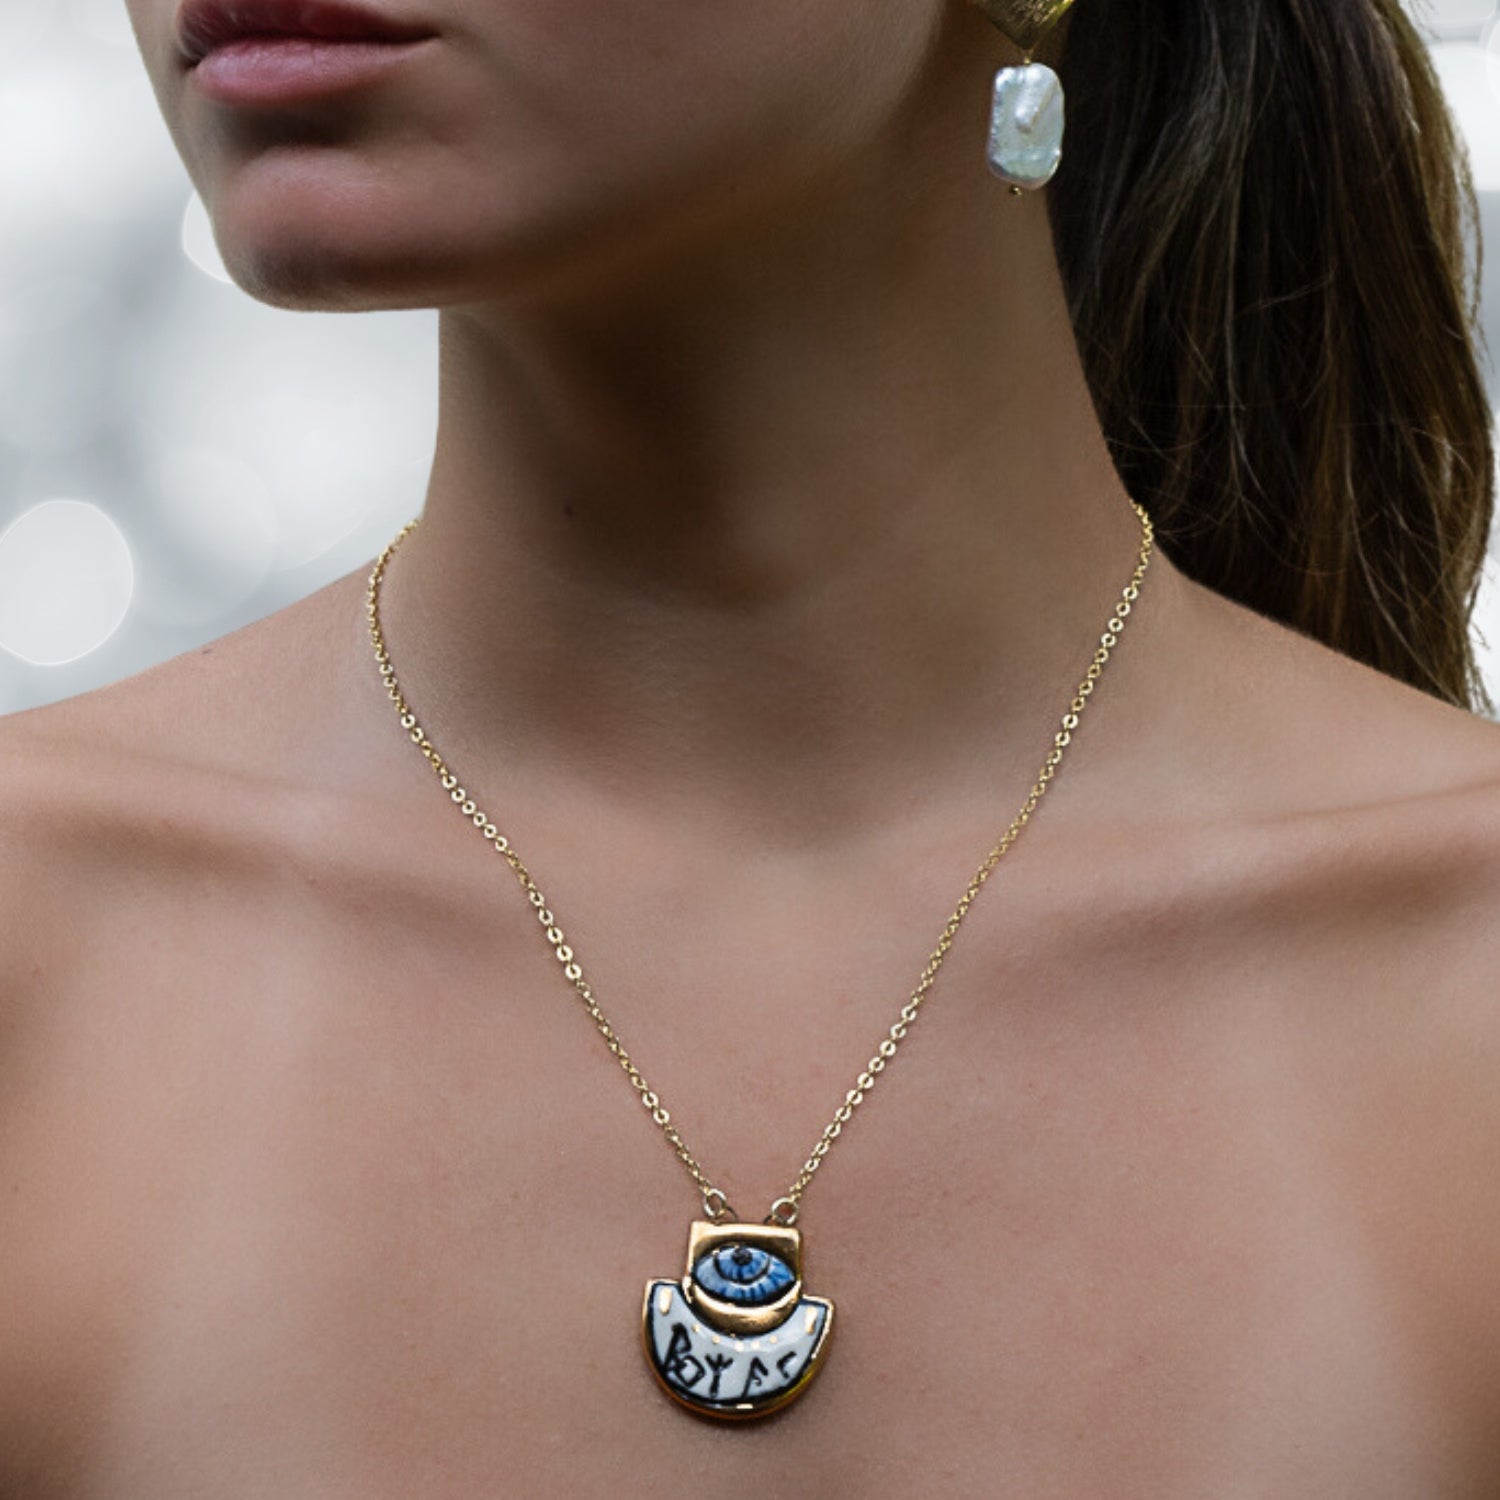 Symbols of Guidance and Protection - The model exemplifies the necklace's talismanic qualities.